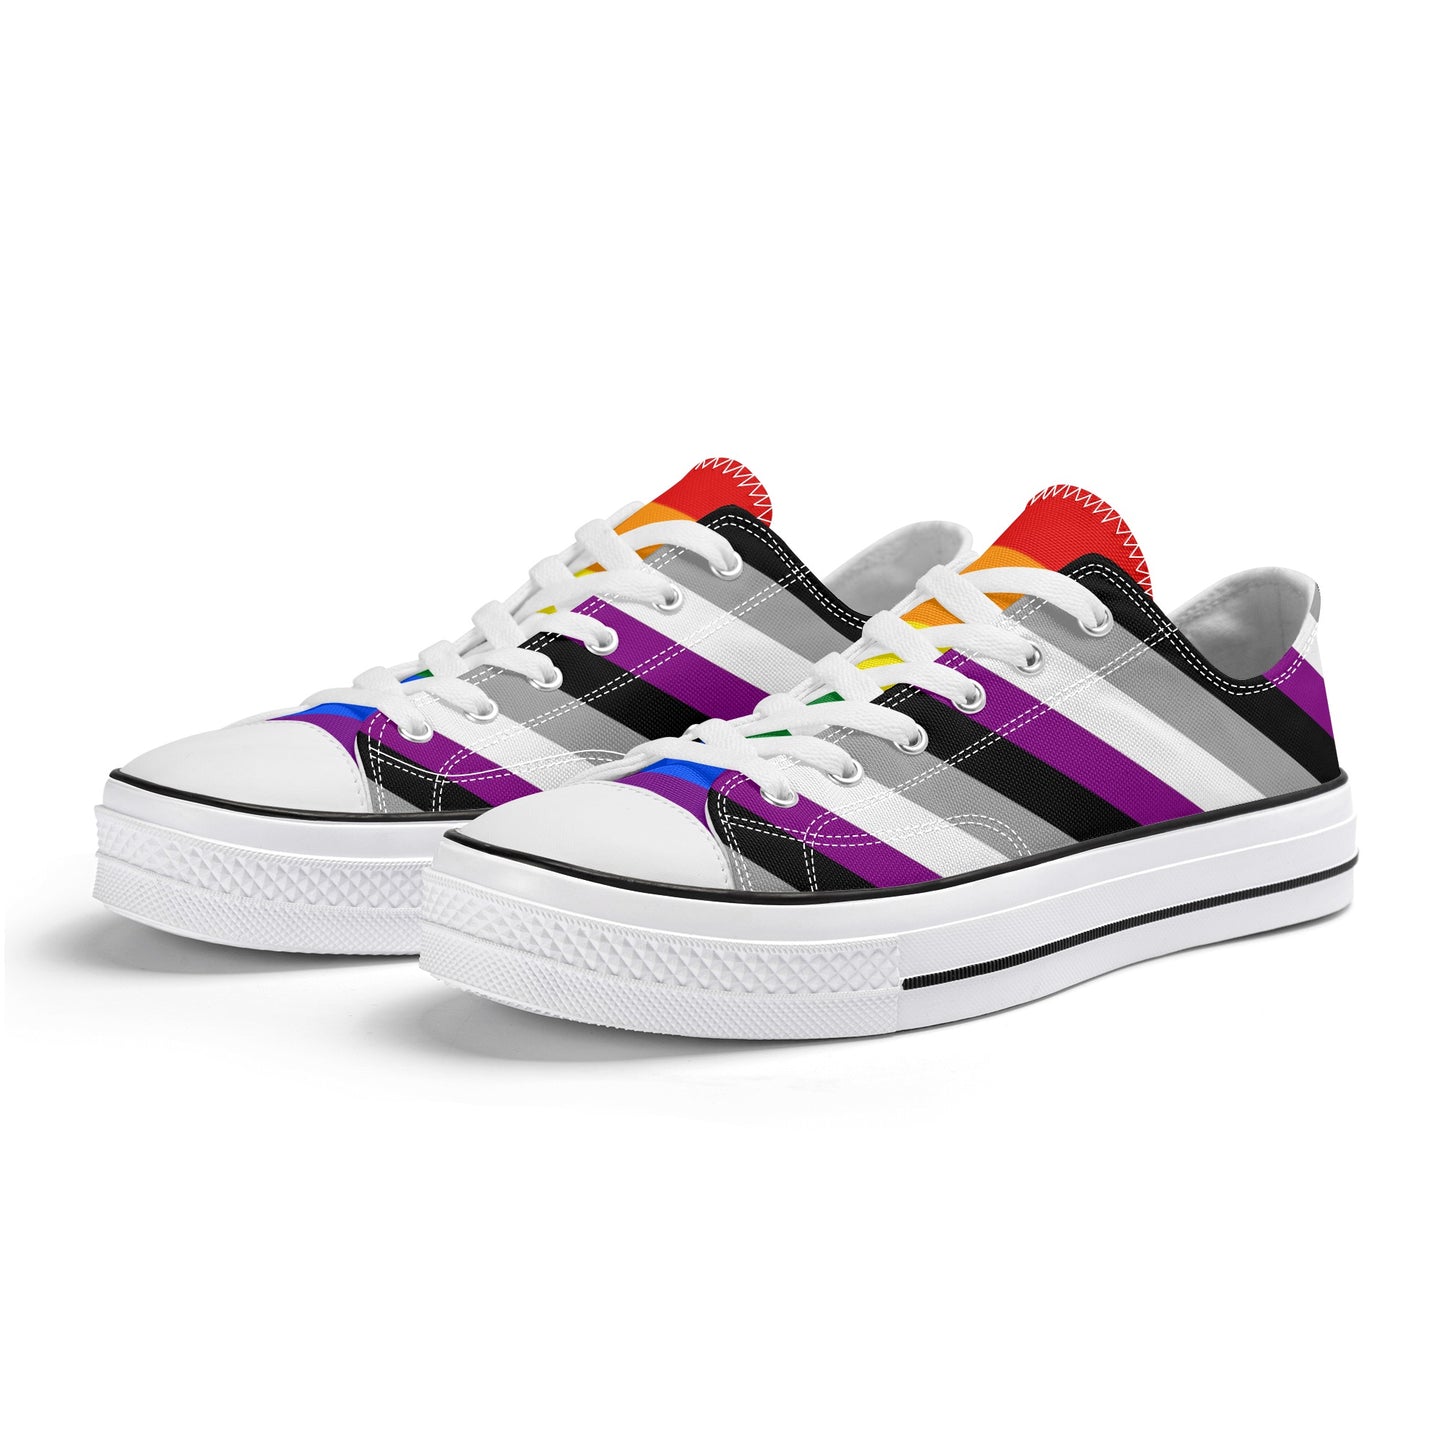 Asexual Pride Collection - Mens Classic Low Top Canvas Shoes for the LGBTQIA+ community